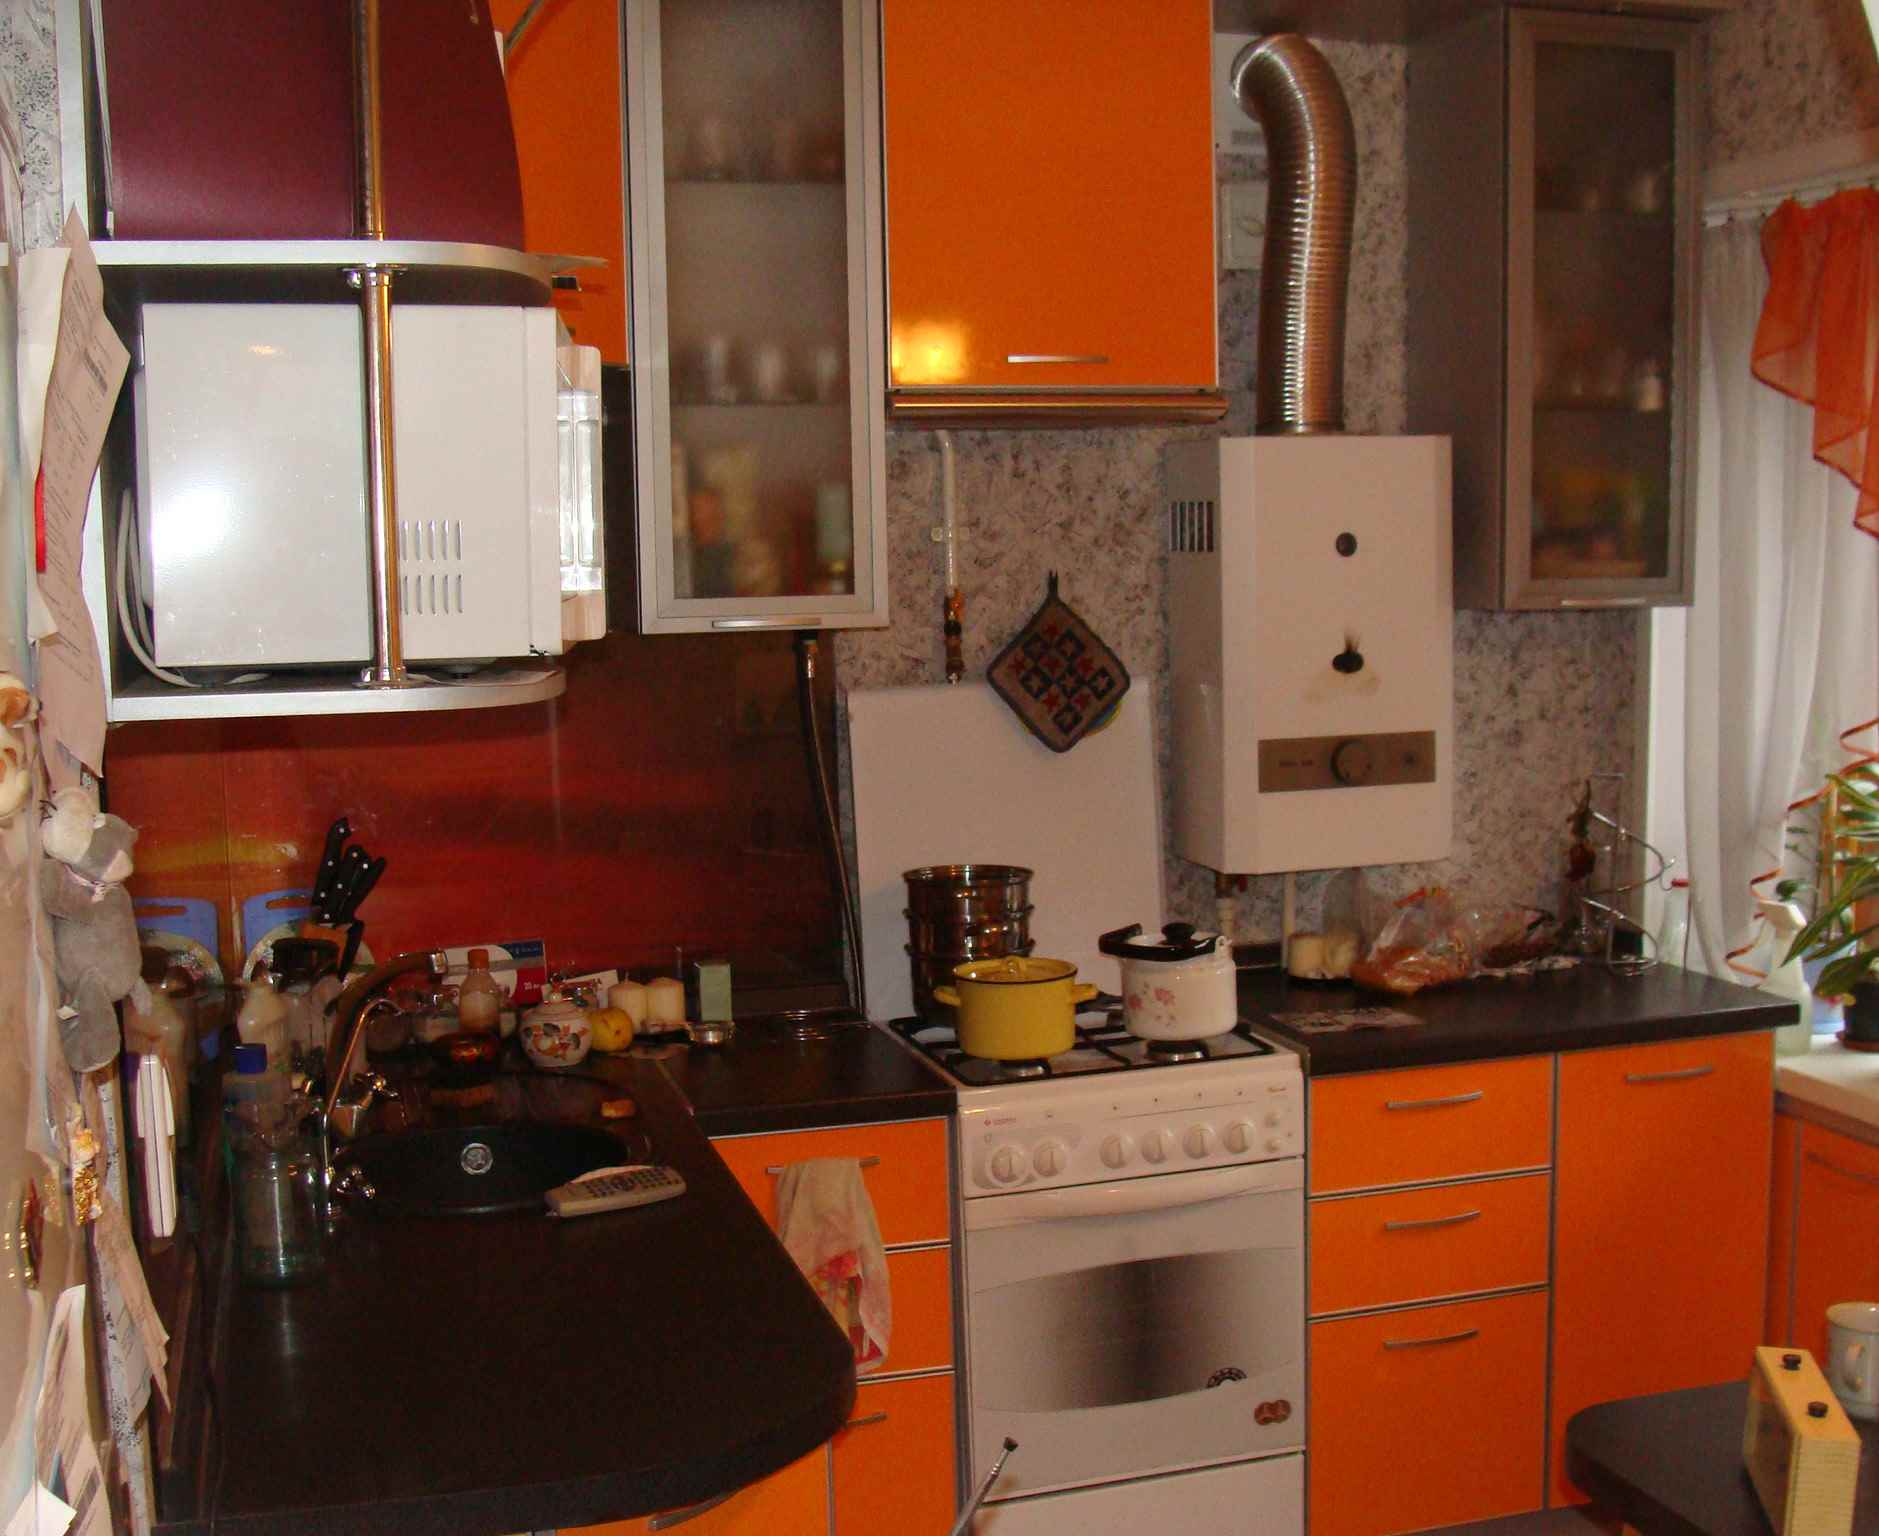 An example of a light kitchen decor with a gas water heater